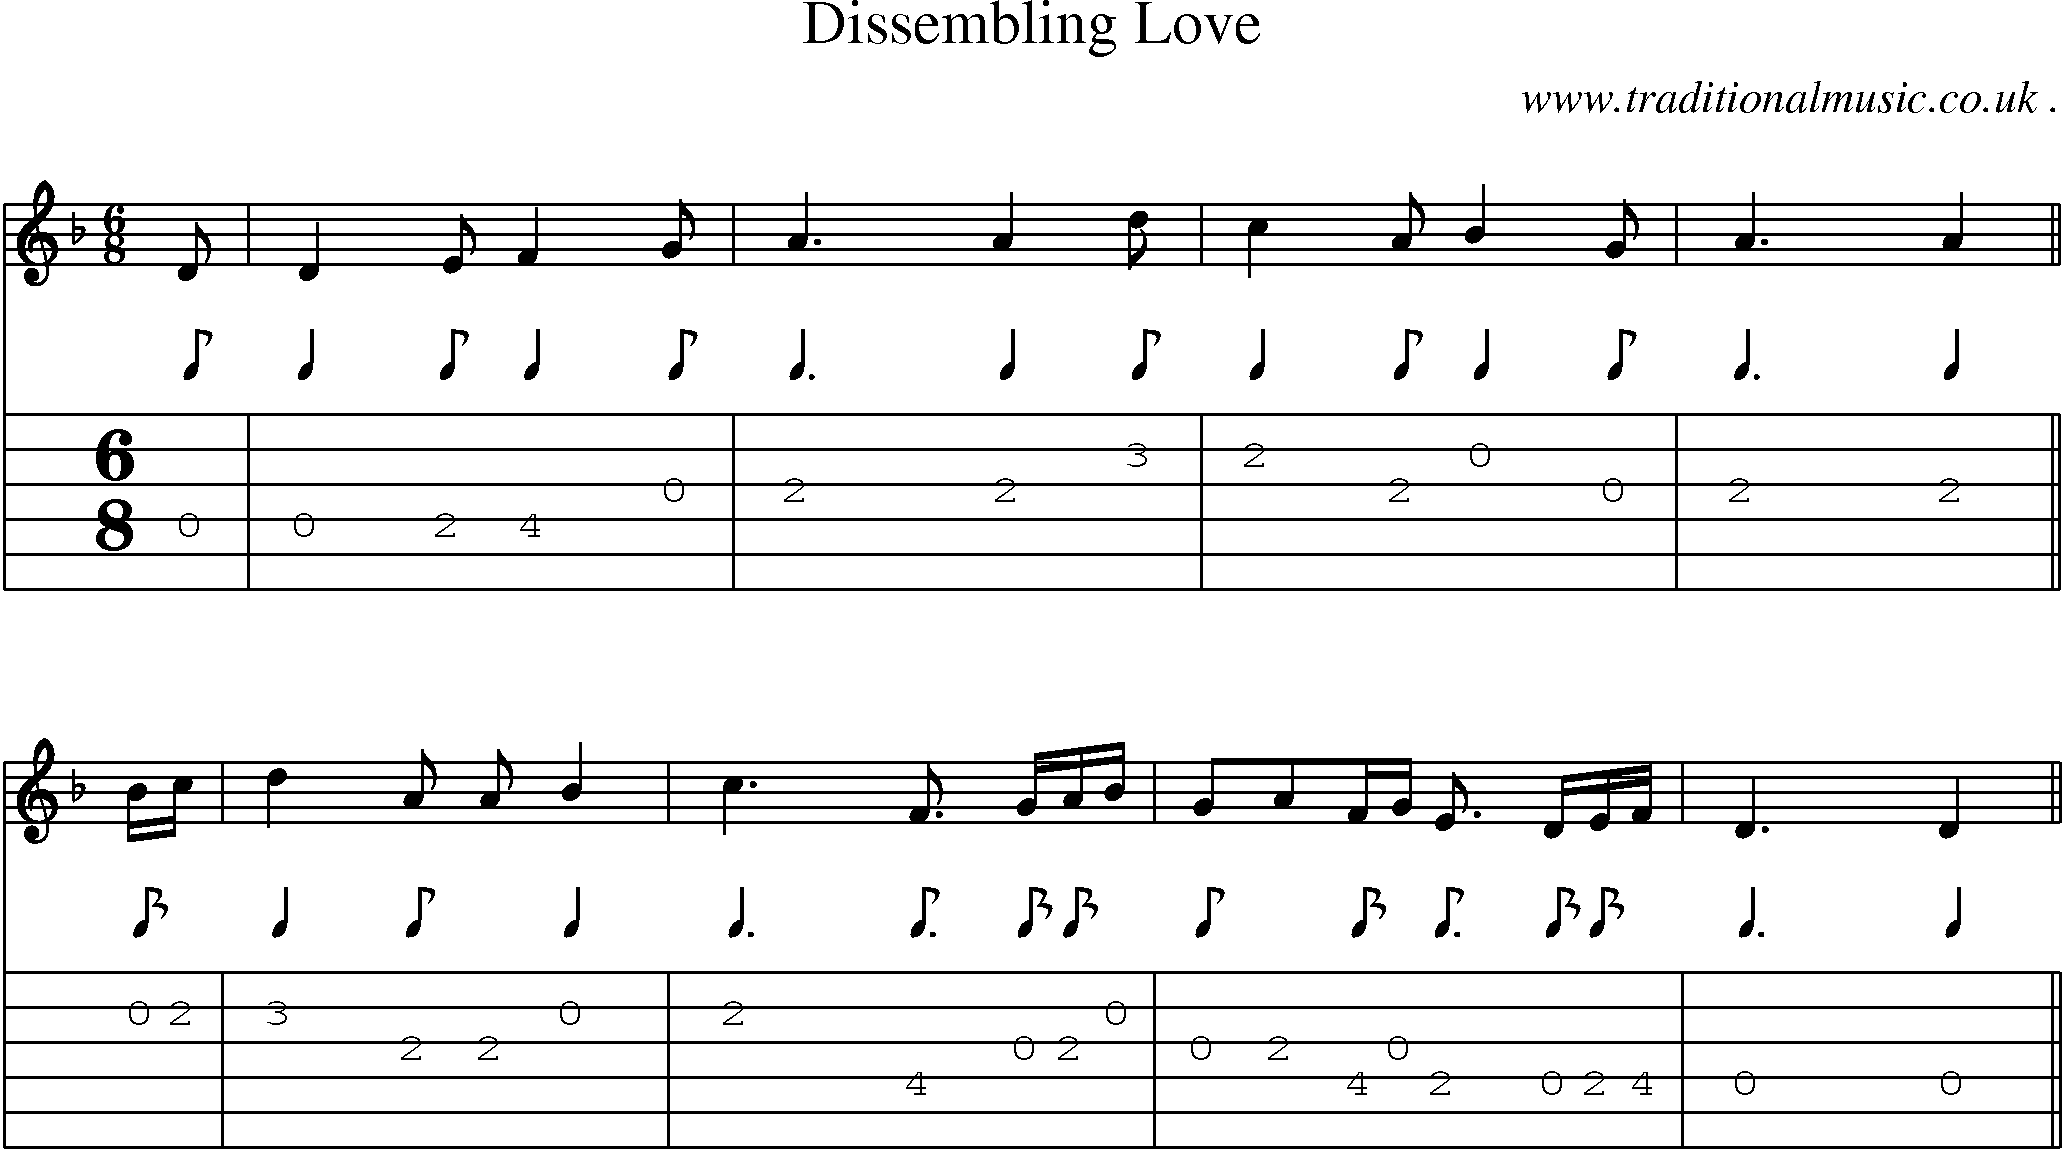 Sheet-Music and Guitar Tabs for Dissembling Love